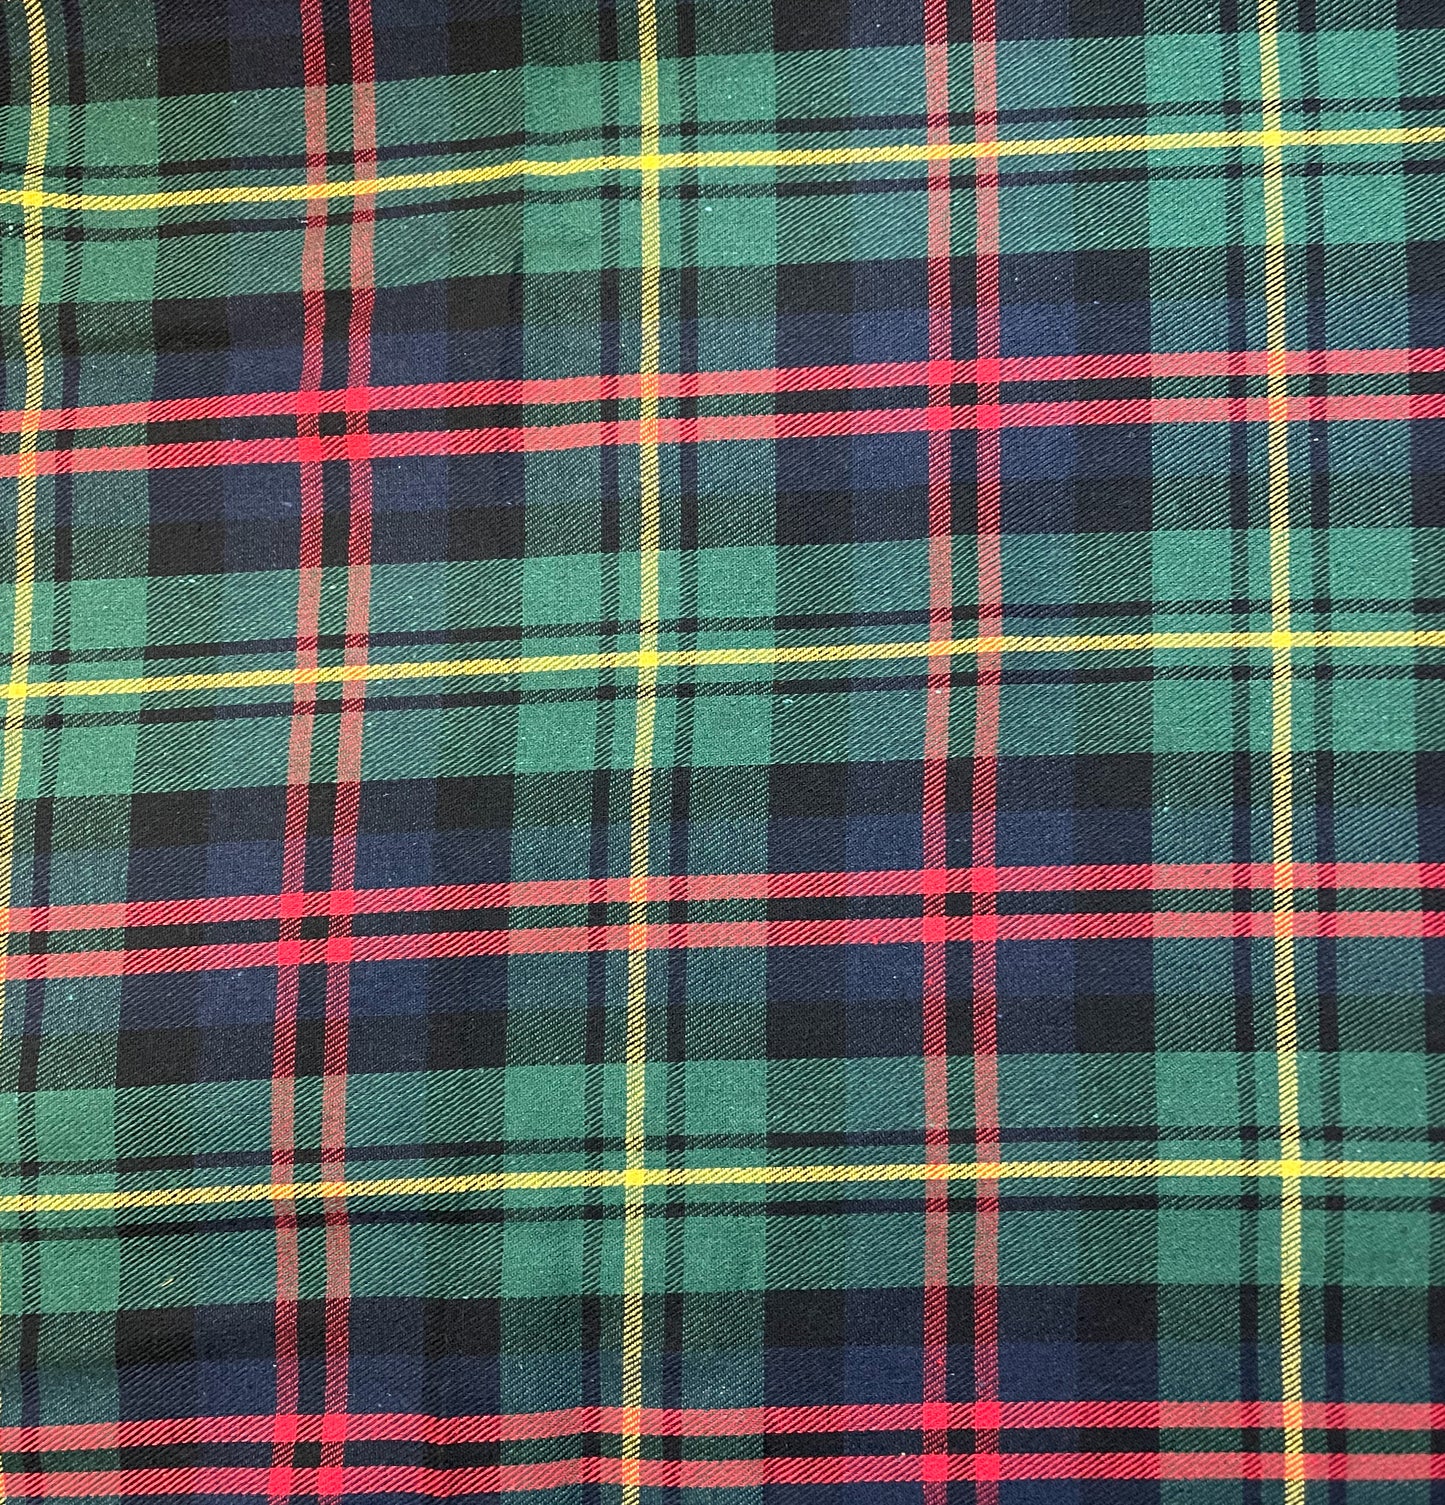 Flannel #17